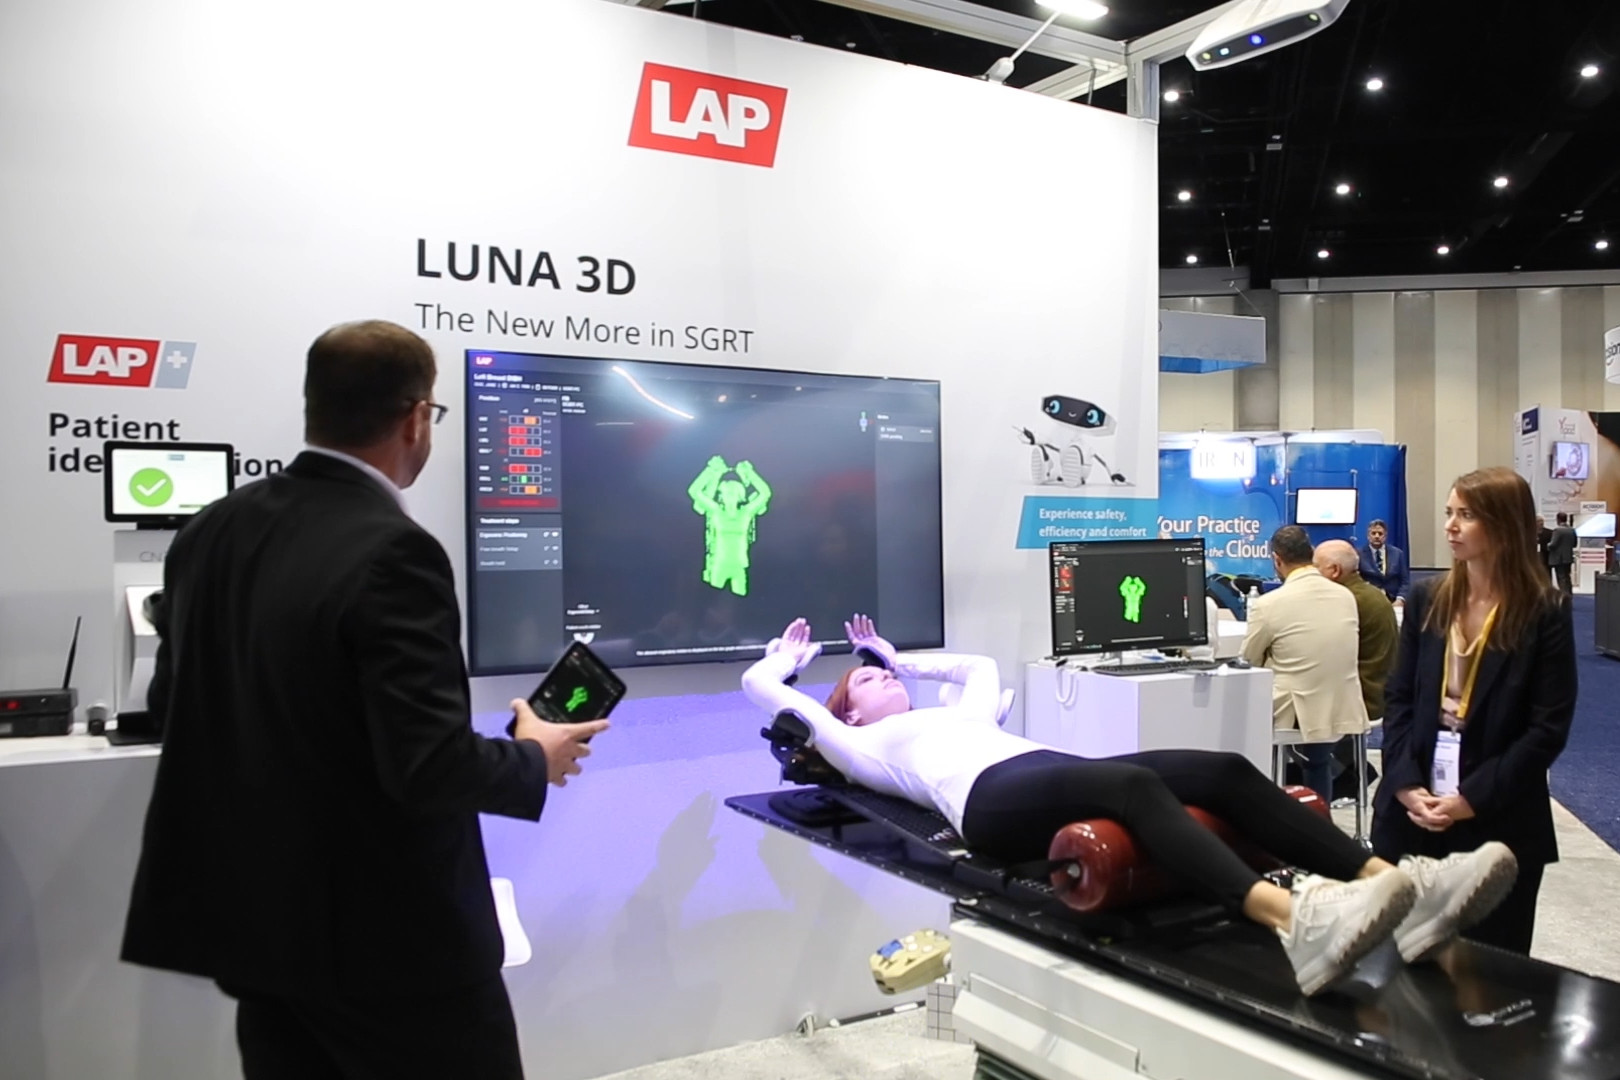 LAP’s LUNA 3D delivers surface guidance for radiation therapy